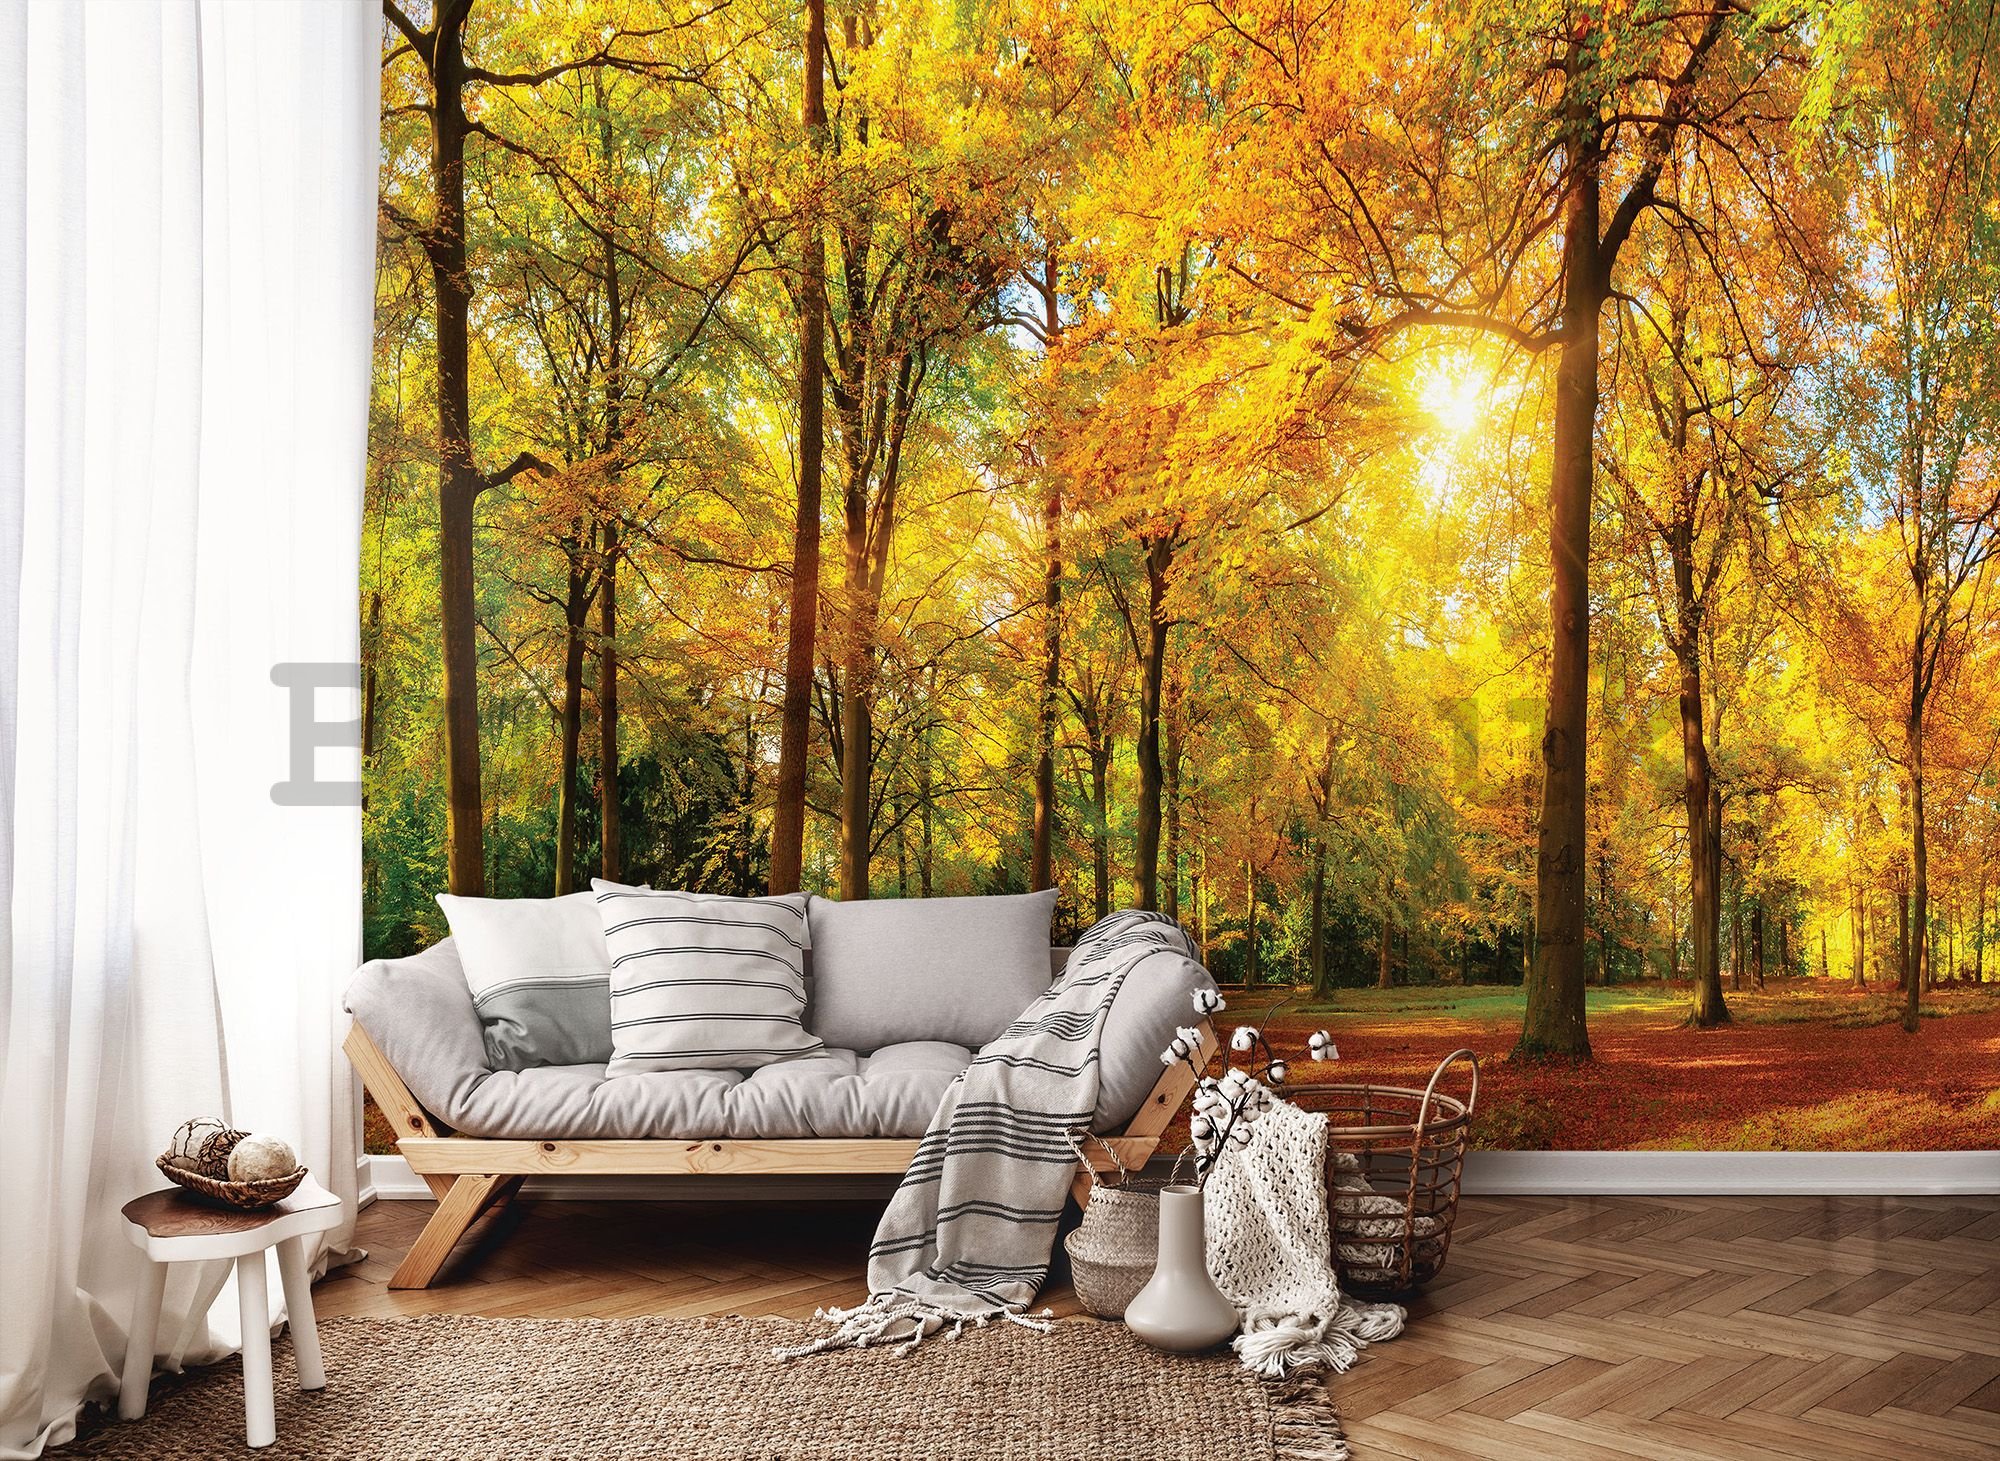 Wall mural vlies: Fallen leaves in the forest - 184x254 cm